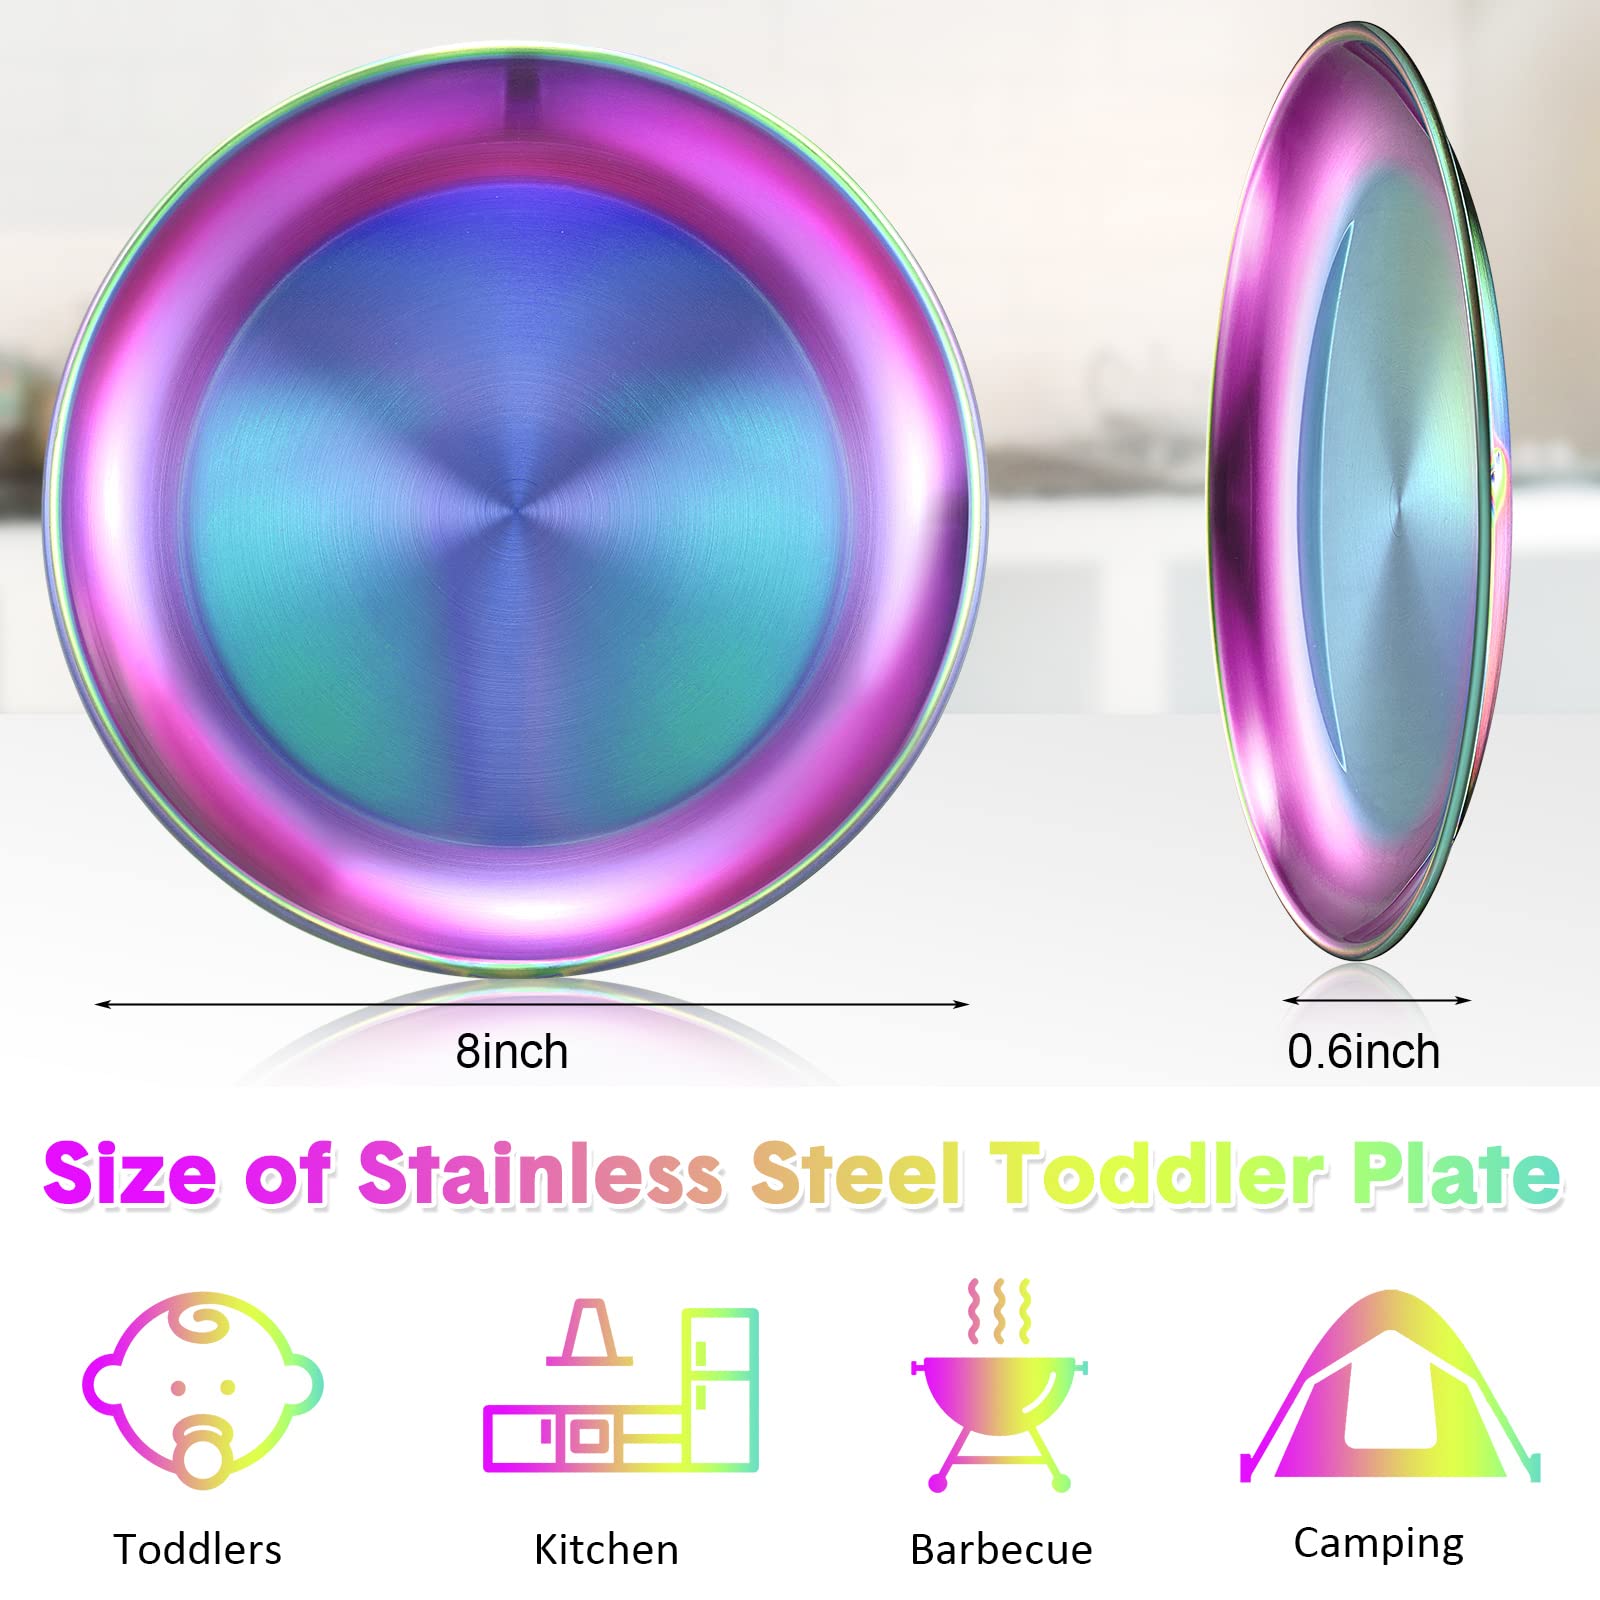 10 Pcs 18/8 Stainless Steel Plate 304 Stainless Steel Dishes 8 Inches Adult Plates Reusable Camping Plates Dishwasher Safe Feeding Serving Flat Plate Double Layers Round Dessert Plate (Multi Color)